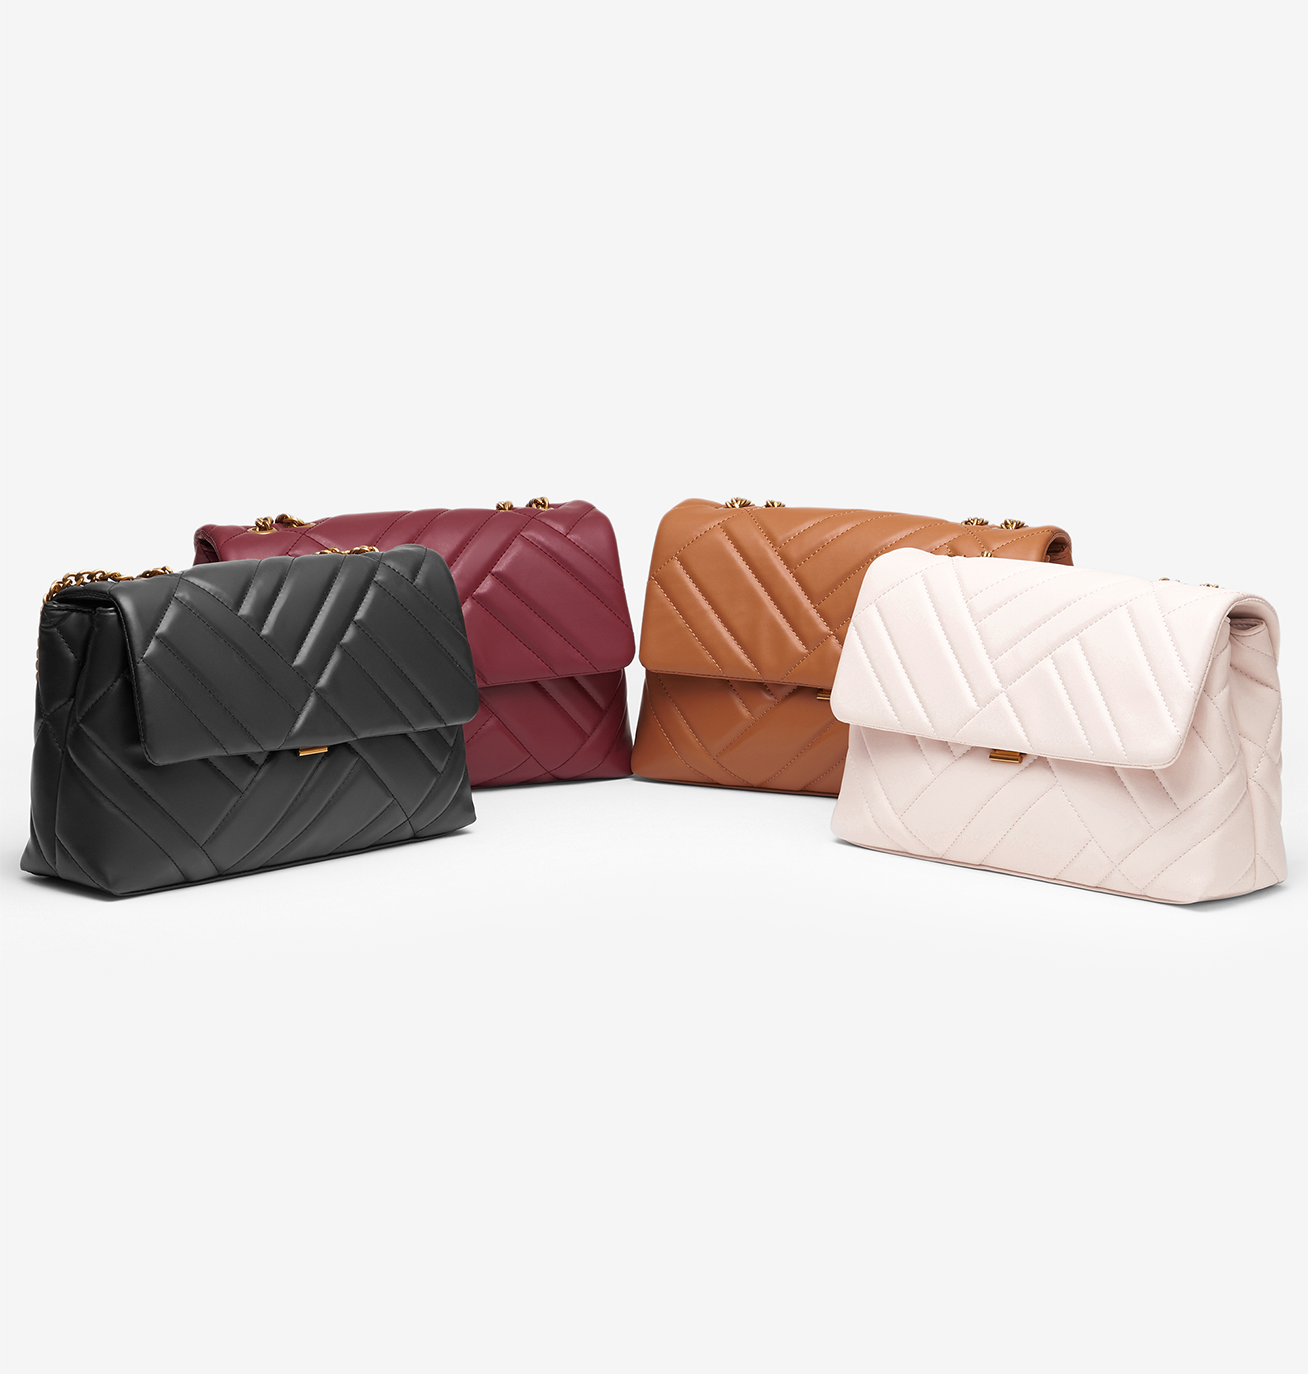 Ladies Bags | Buy Bags for Women Online - Accessorize India